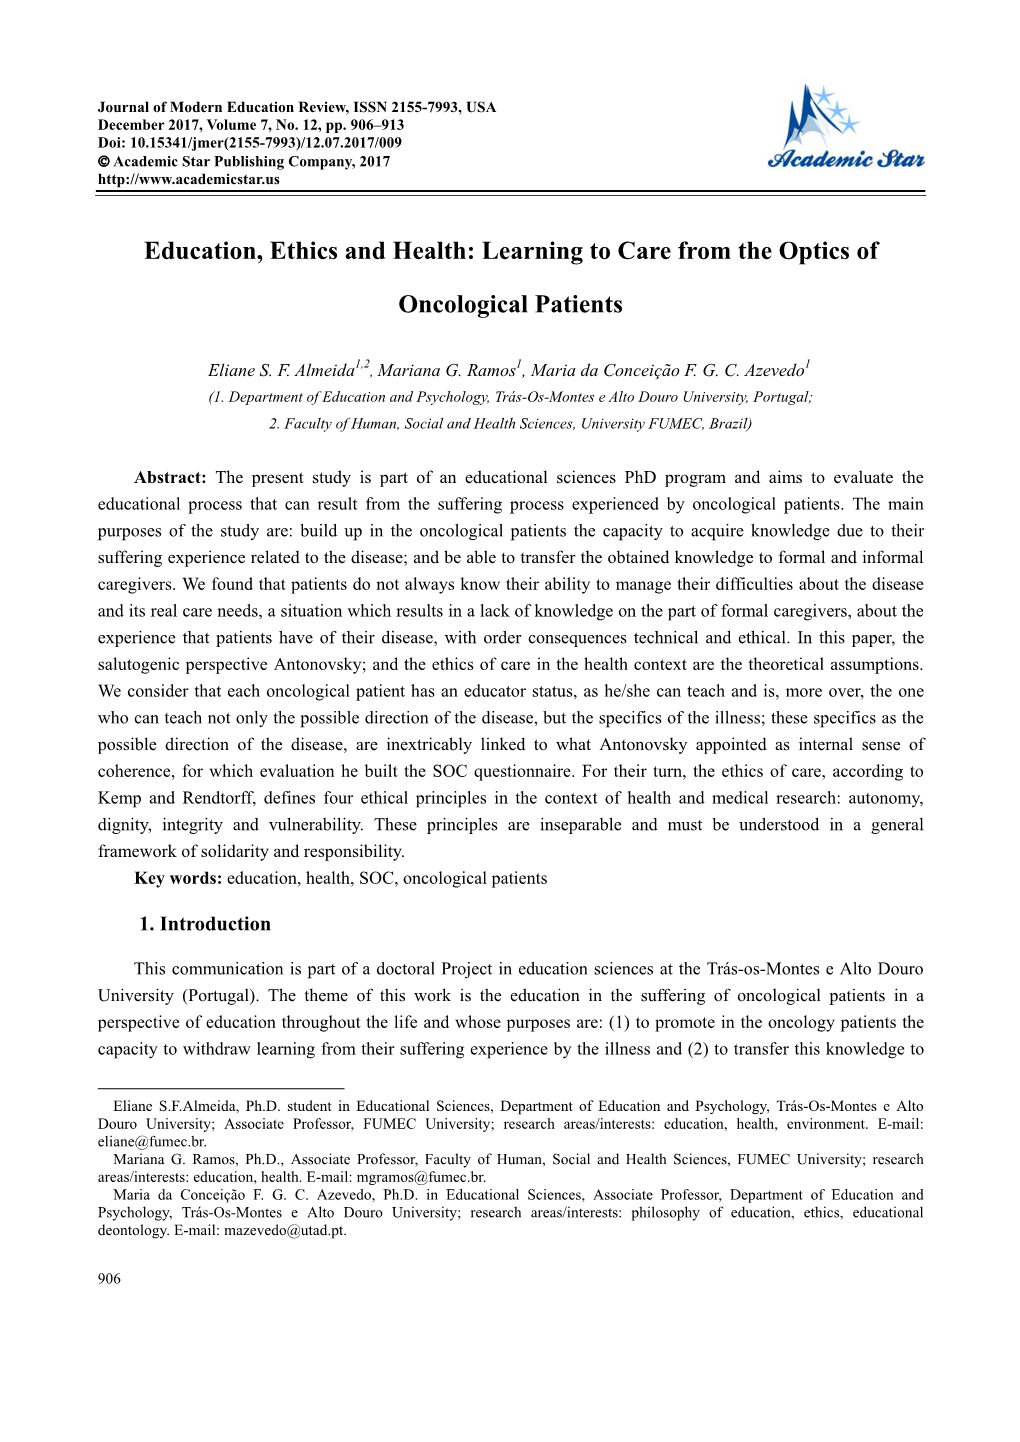 Education, Ethics and Health: Learning to Care from the Optics of Oncological Patients the Learning of Care by Formal and Informal Caregivers